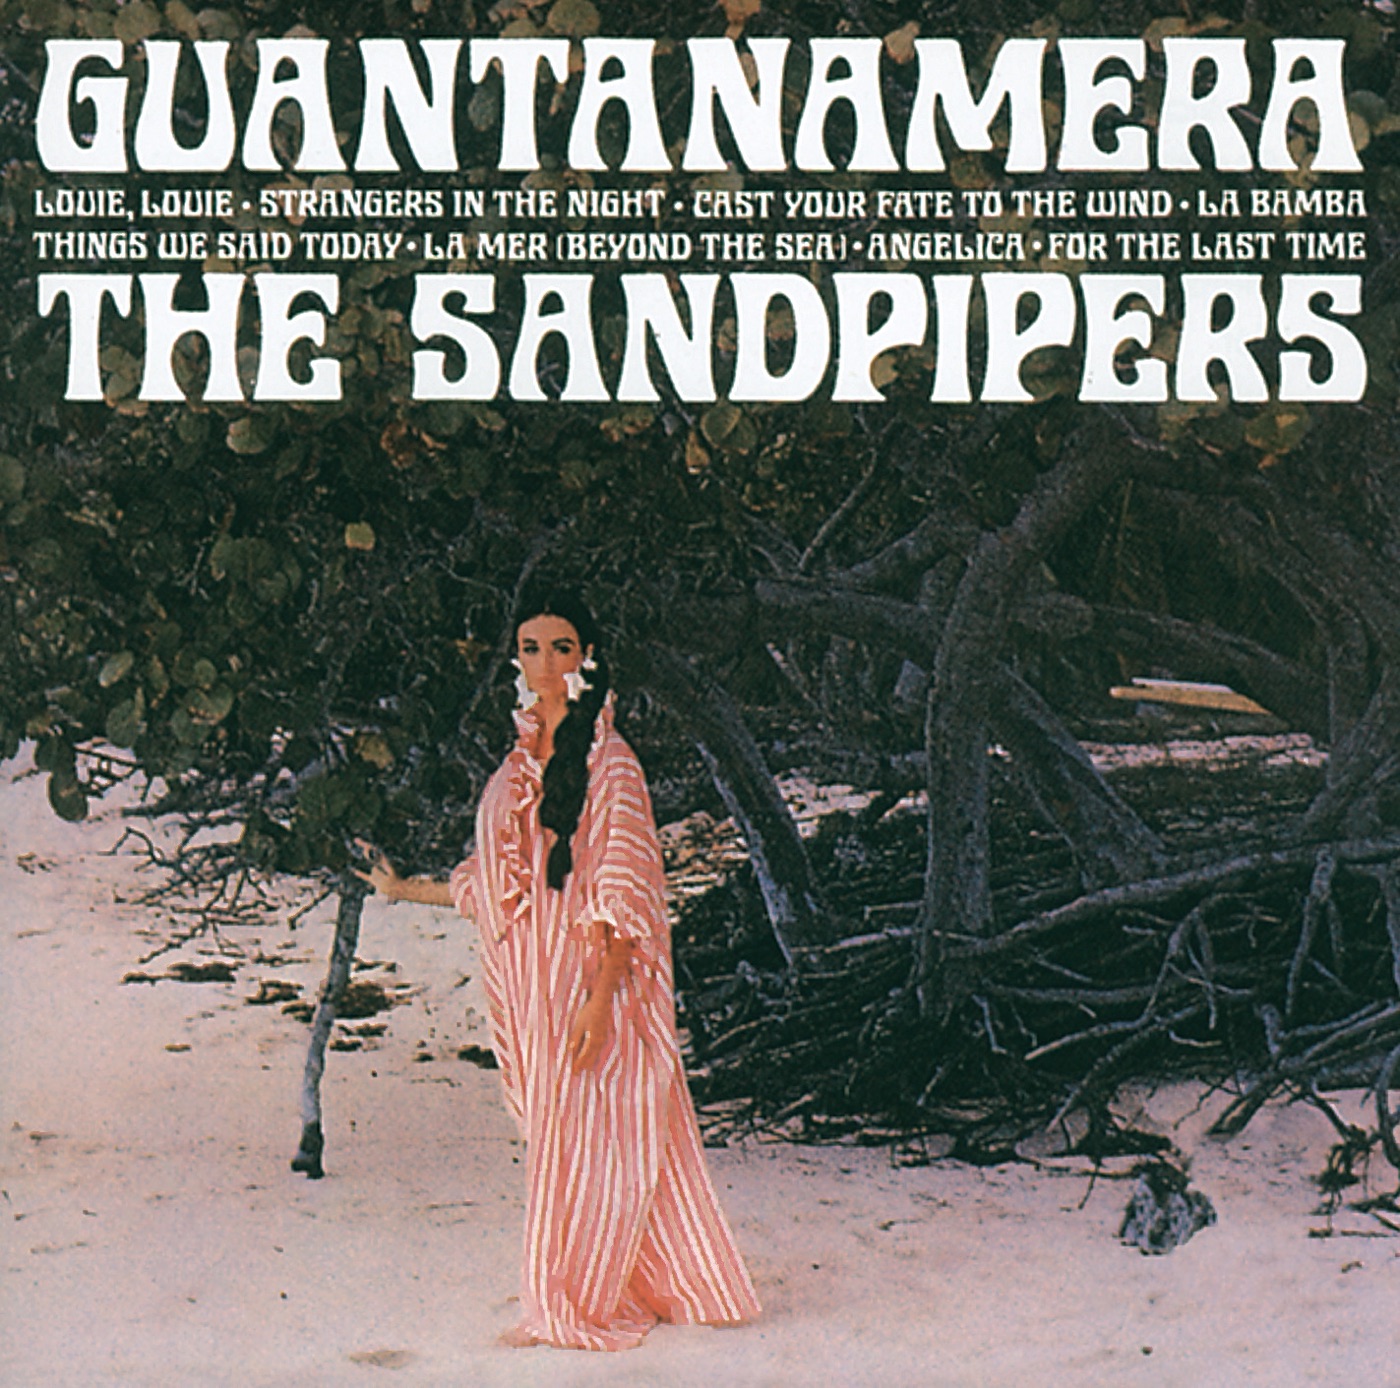 Guantanamera by The Sandpipers